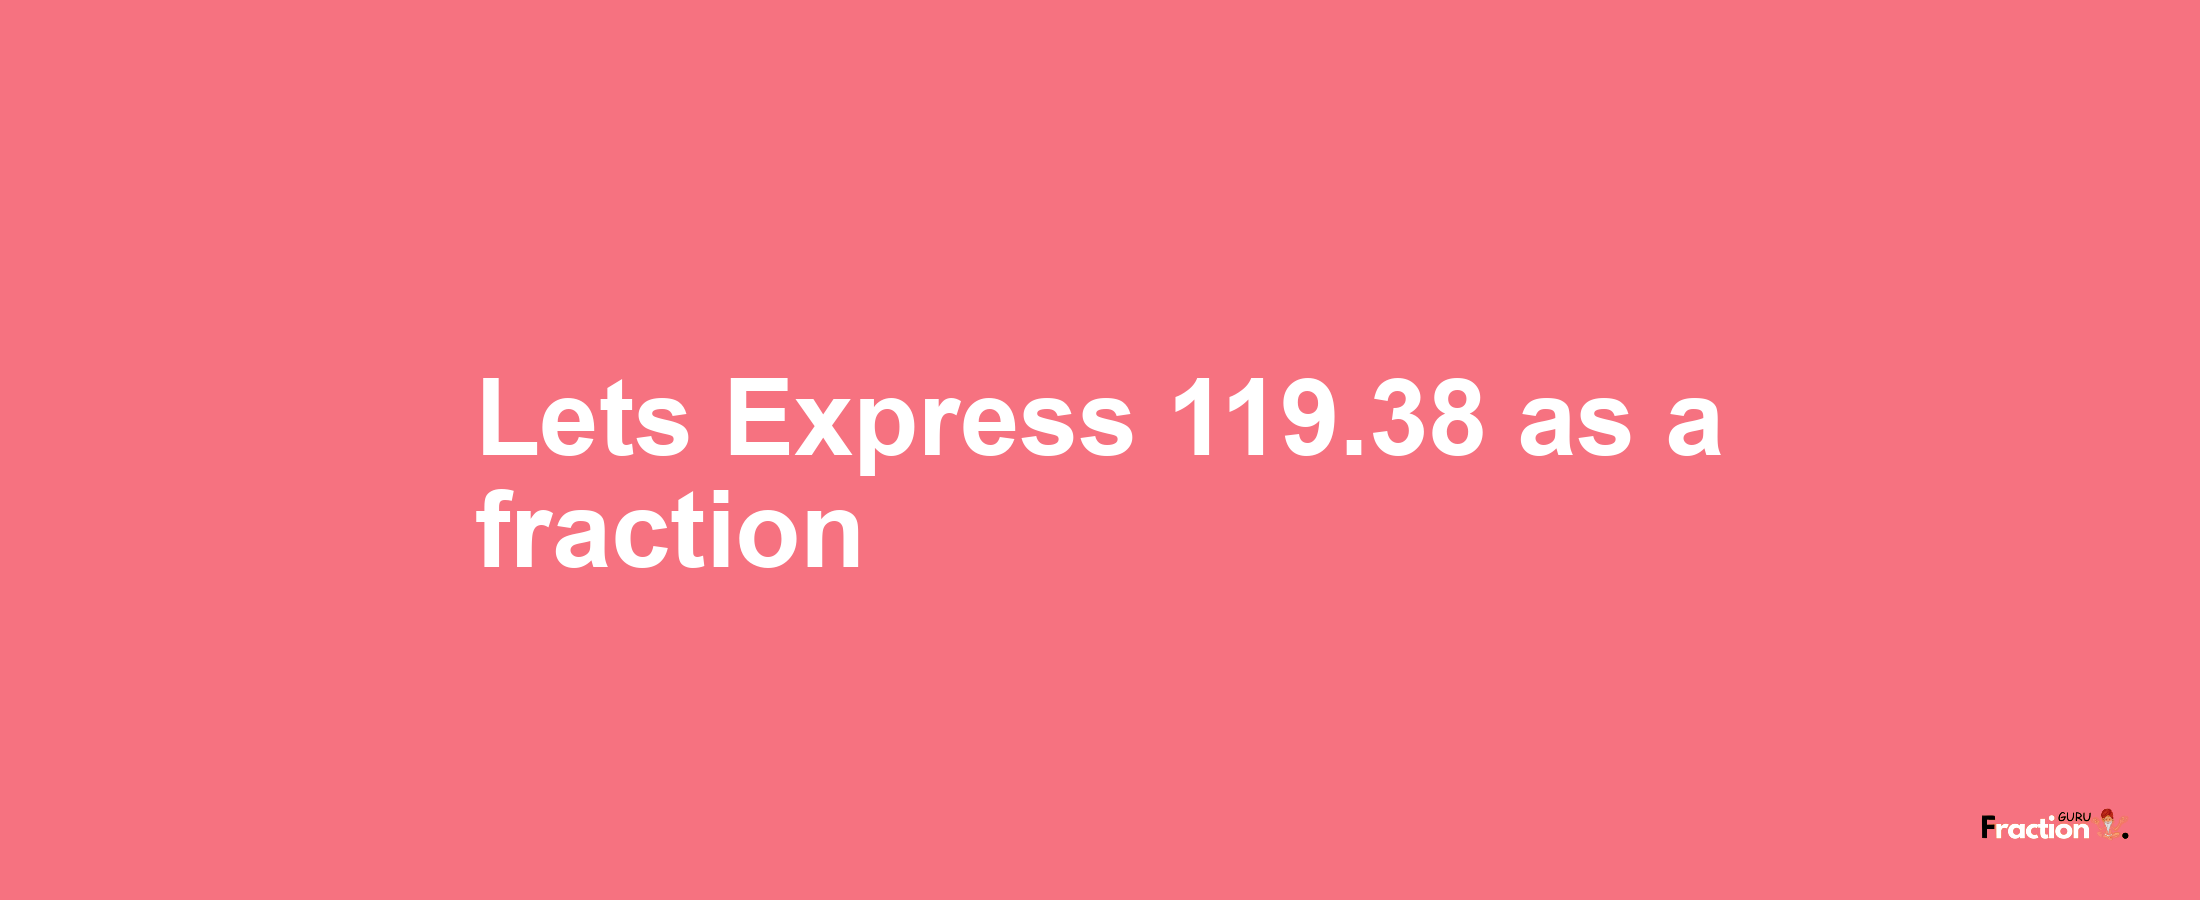 Lets Express 119.38 as afraction